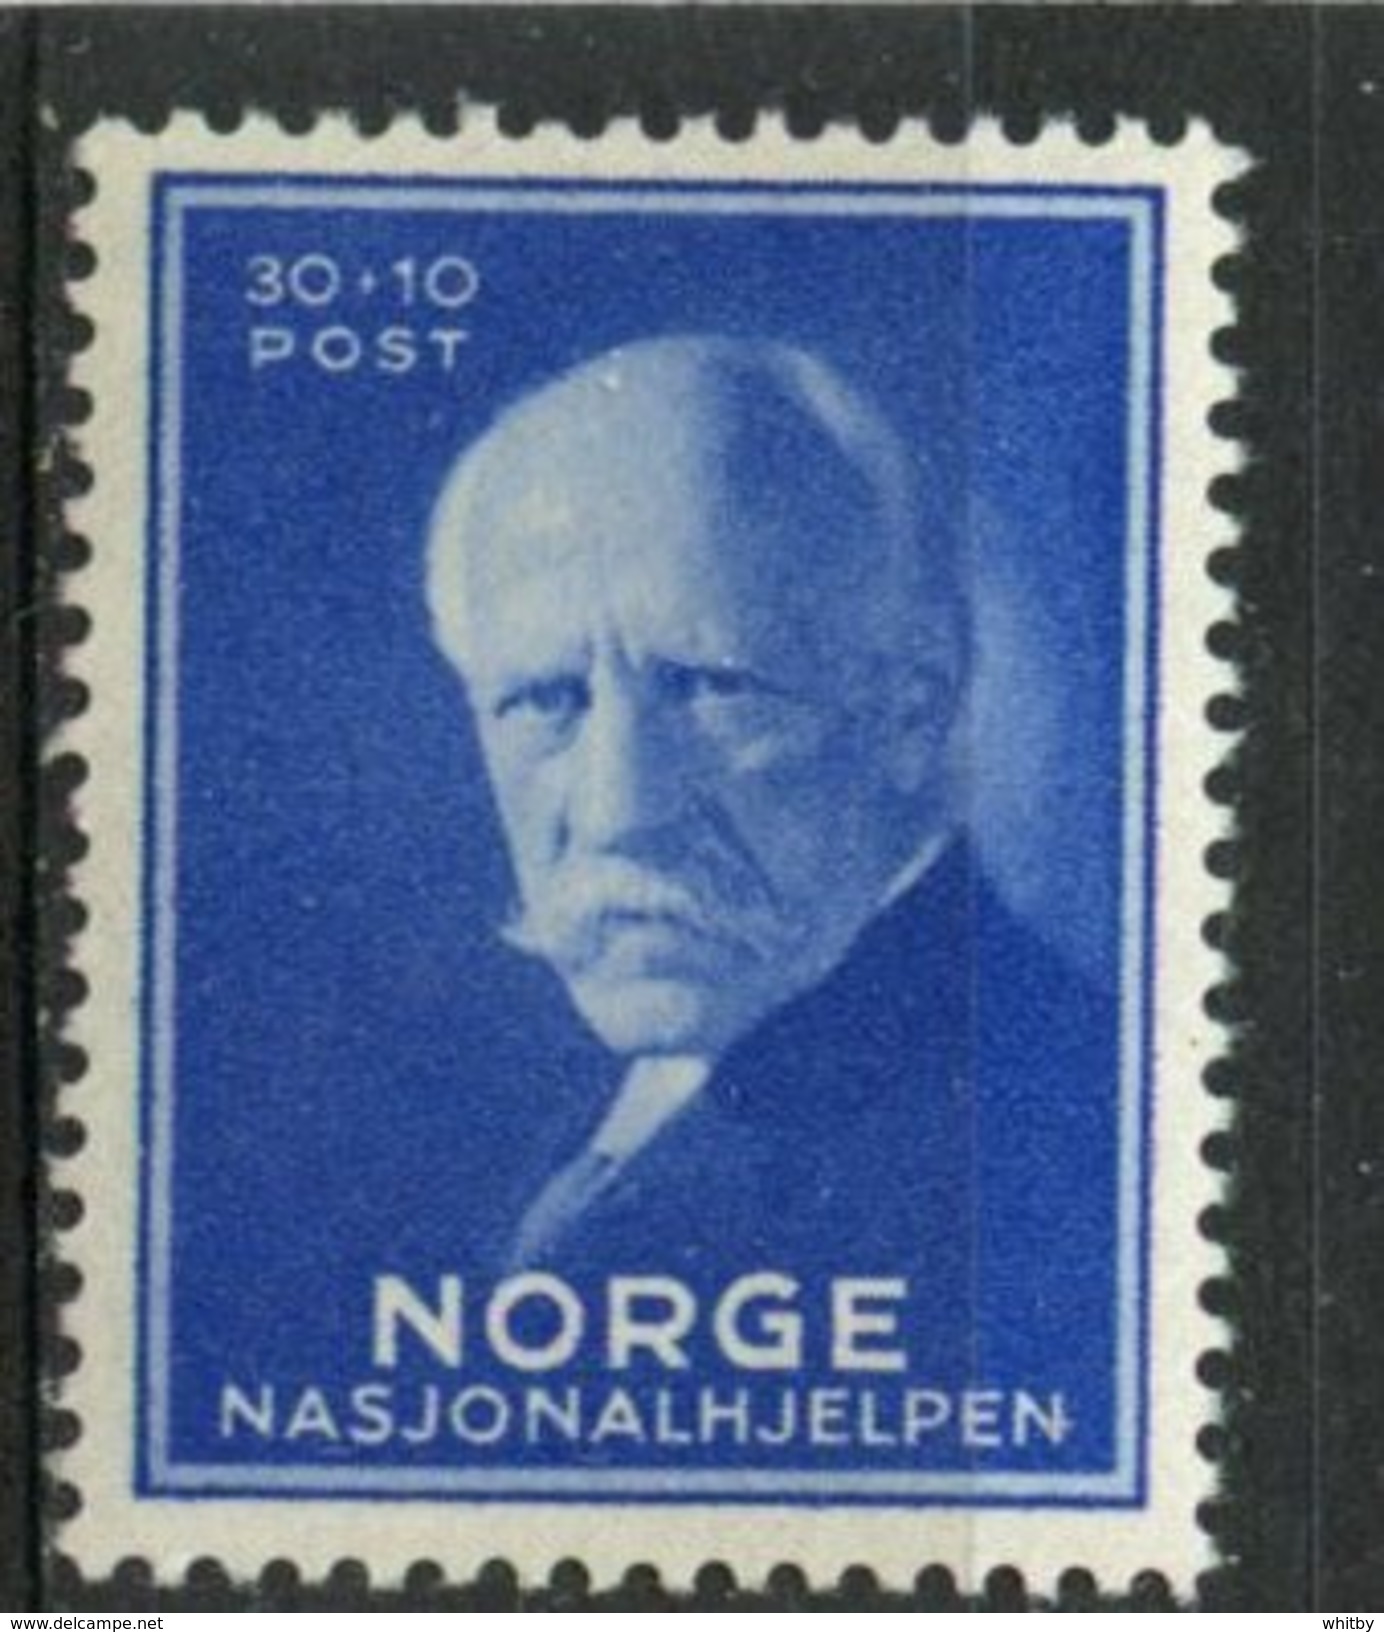 Norway 1940  30+10o Fridtjof  Nansen Issue  #B18  MH - Fiscales